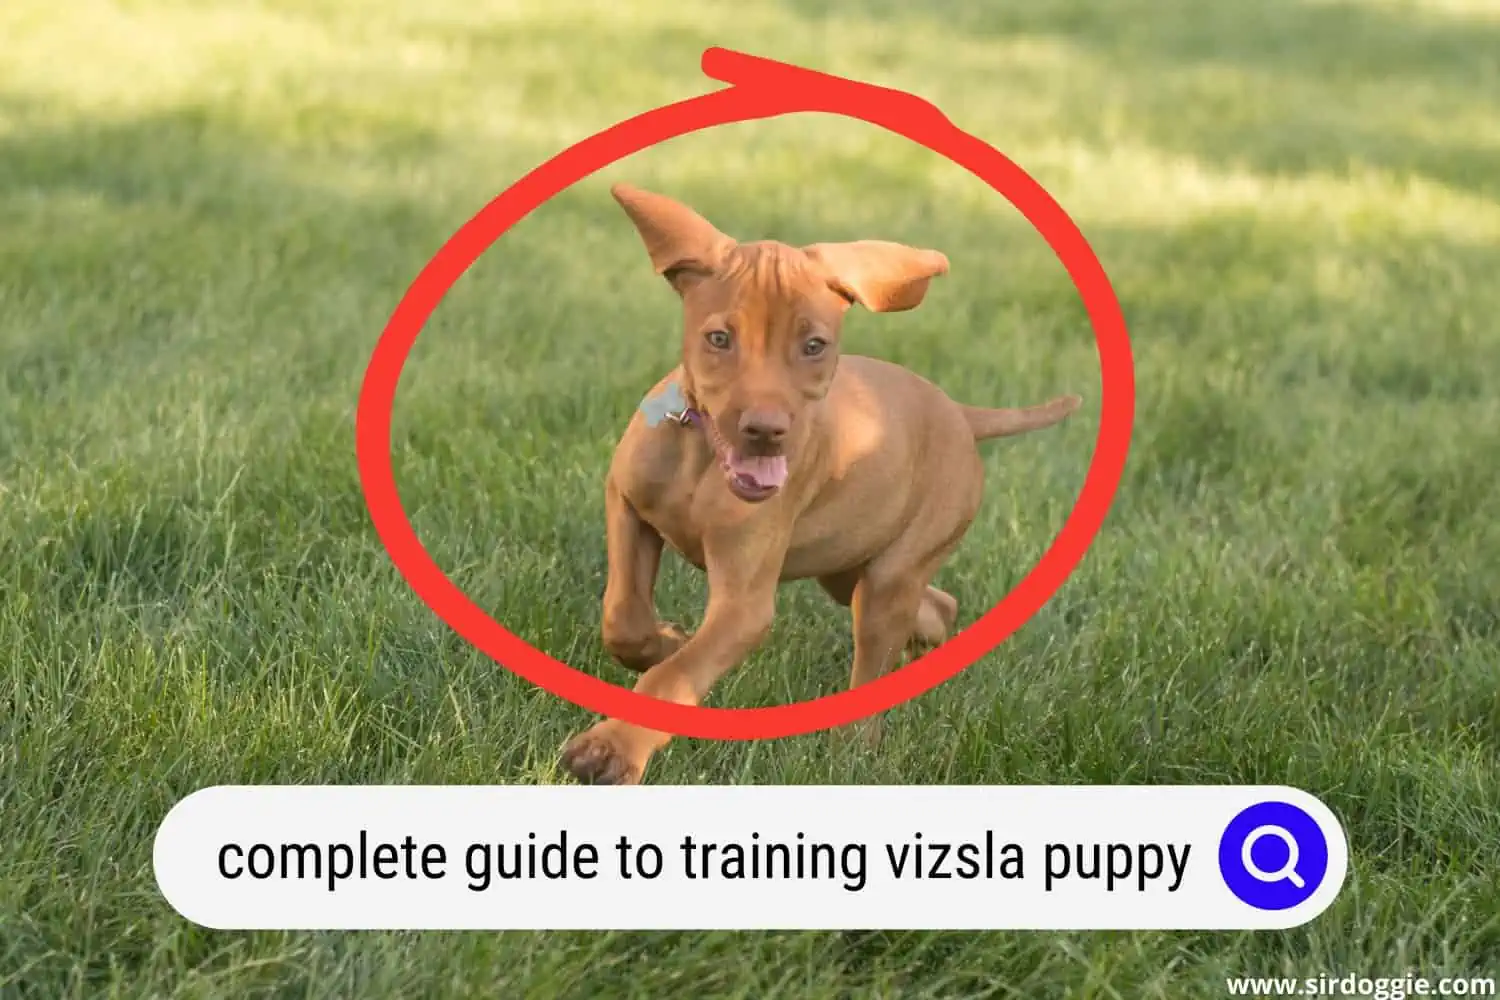 The Complete Guide to Training Your Vizsla Puppy